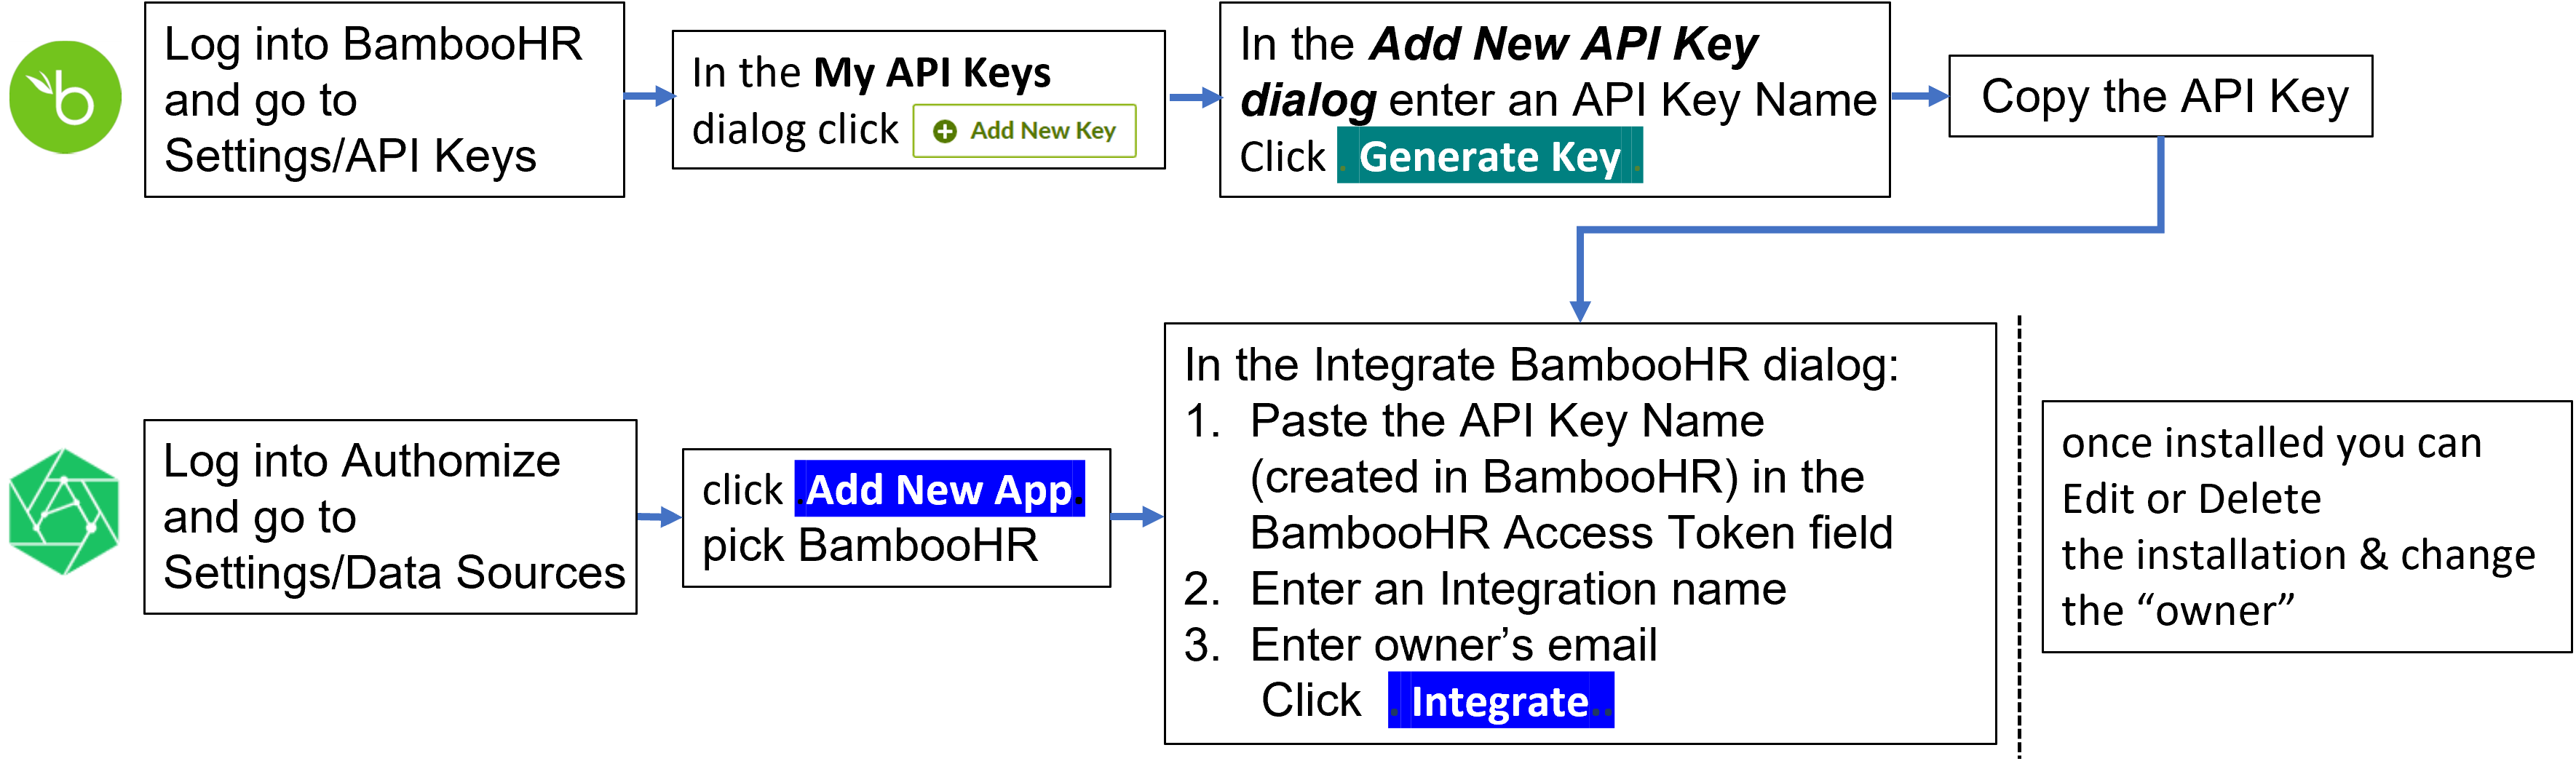 BambooHR_Integration_Workflow-3.png